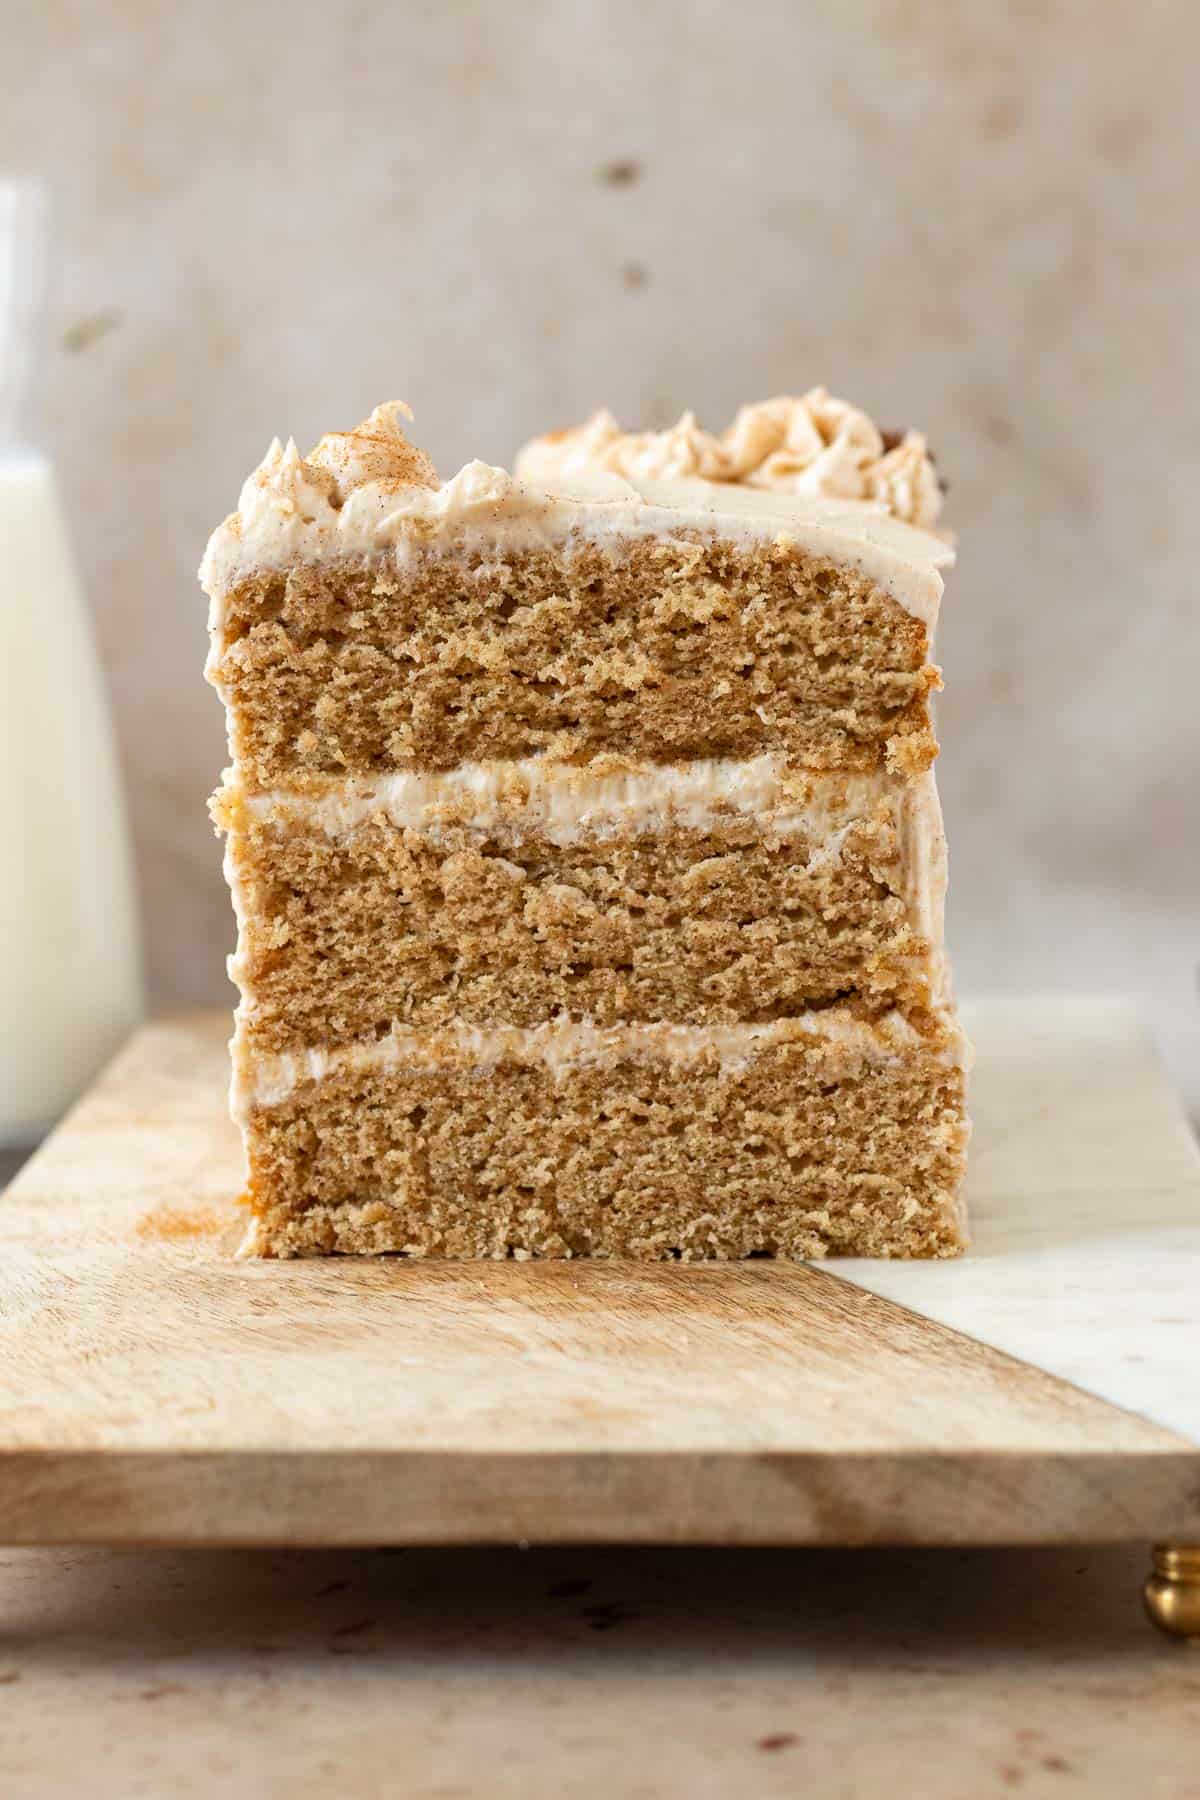 chai cake sliced open showing 3 layers of cake and 2 layers of frosting, sitting on a wood cutting board